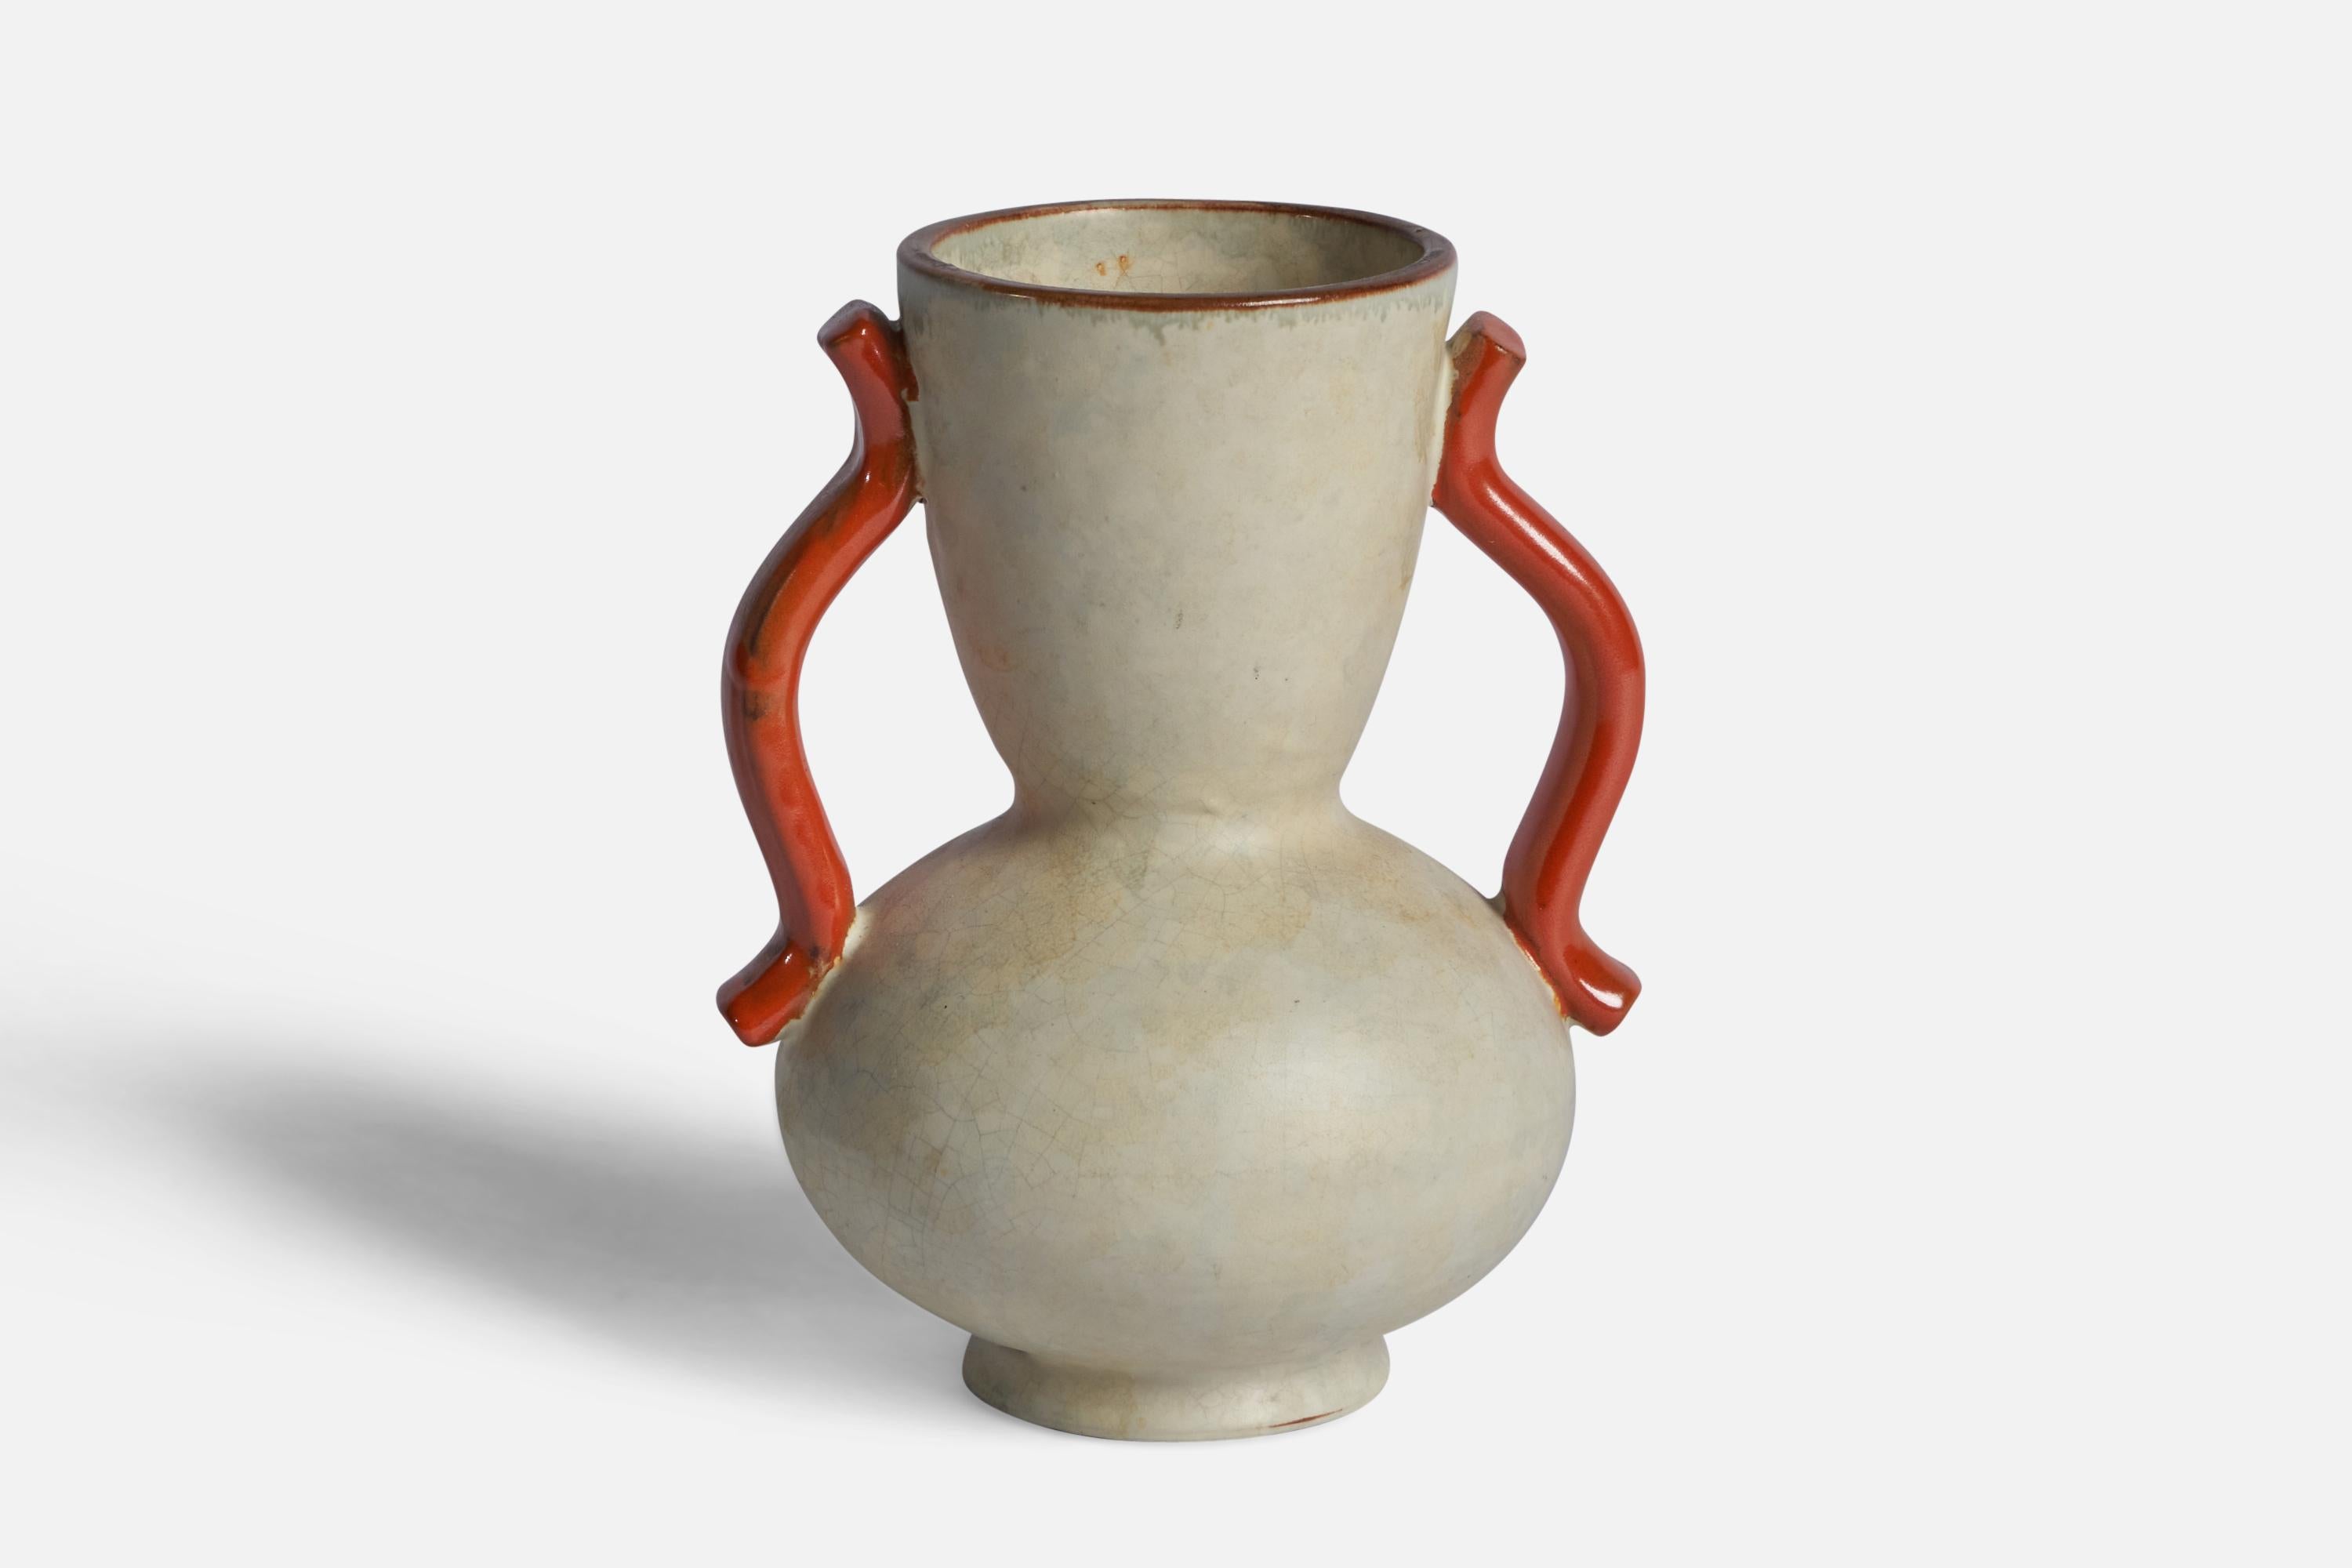 An off-white and orange-glazed earthenware vase designed by Anna-Lisa Thomson and produced by Upsala Ekeby, Sweden, 1930s.